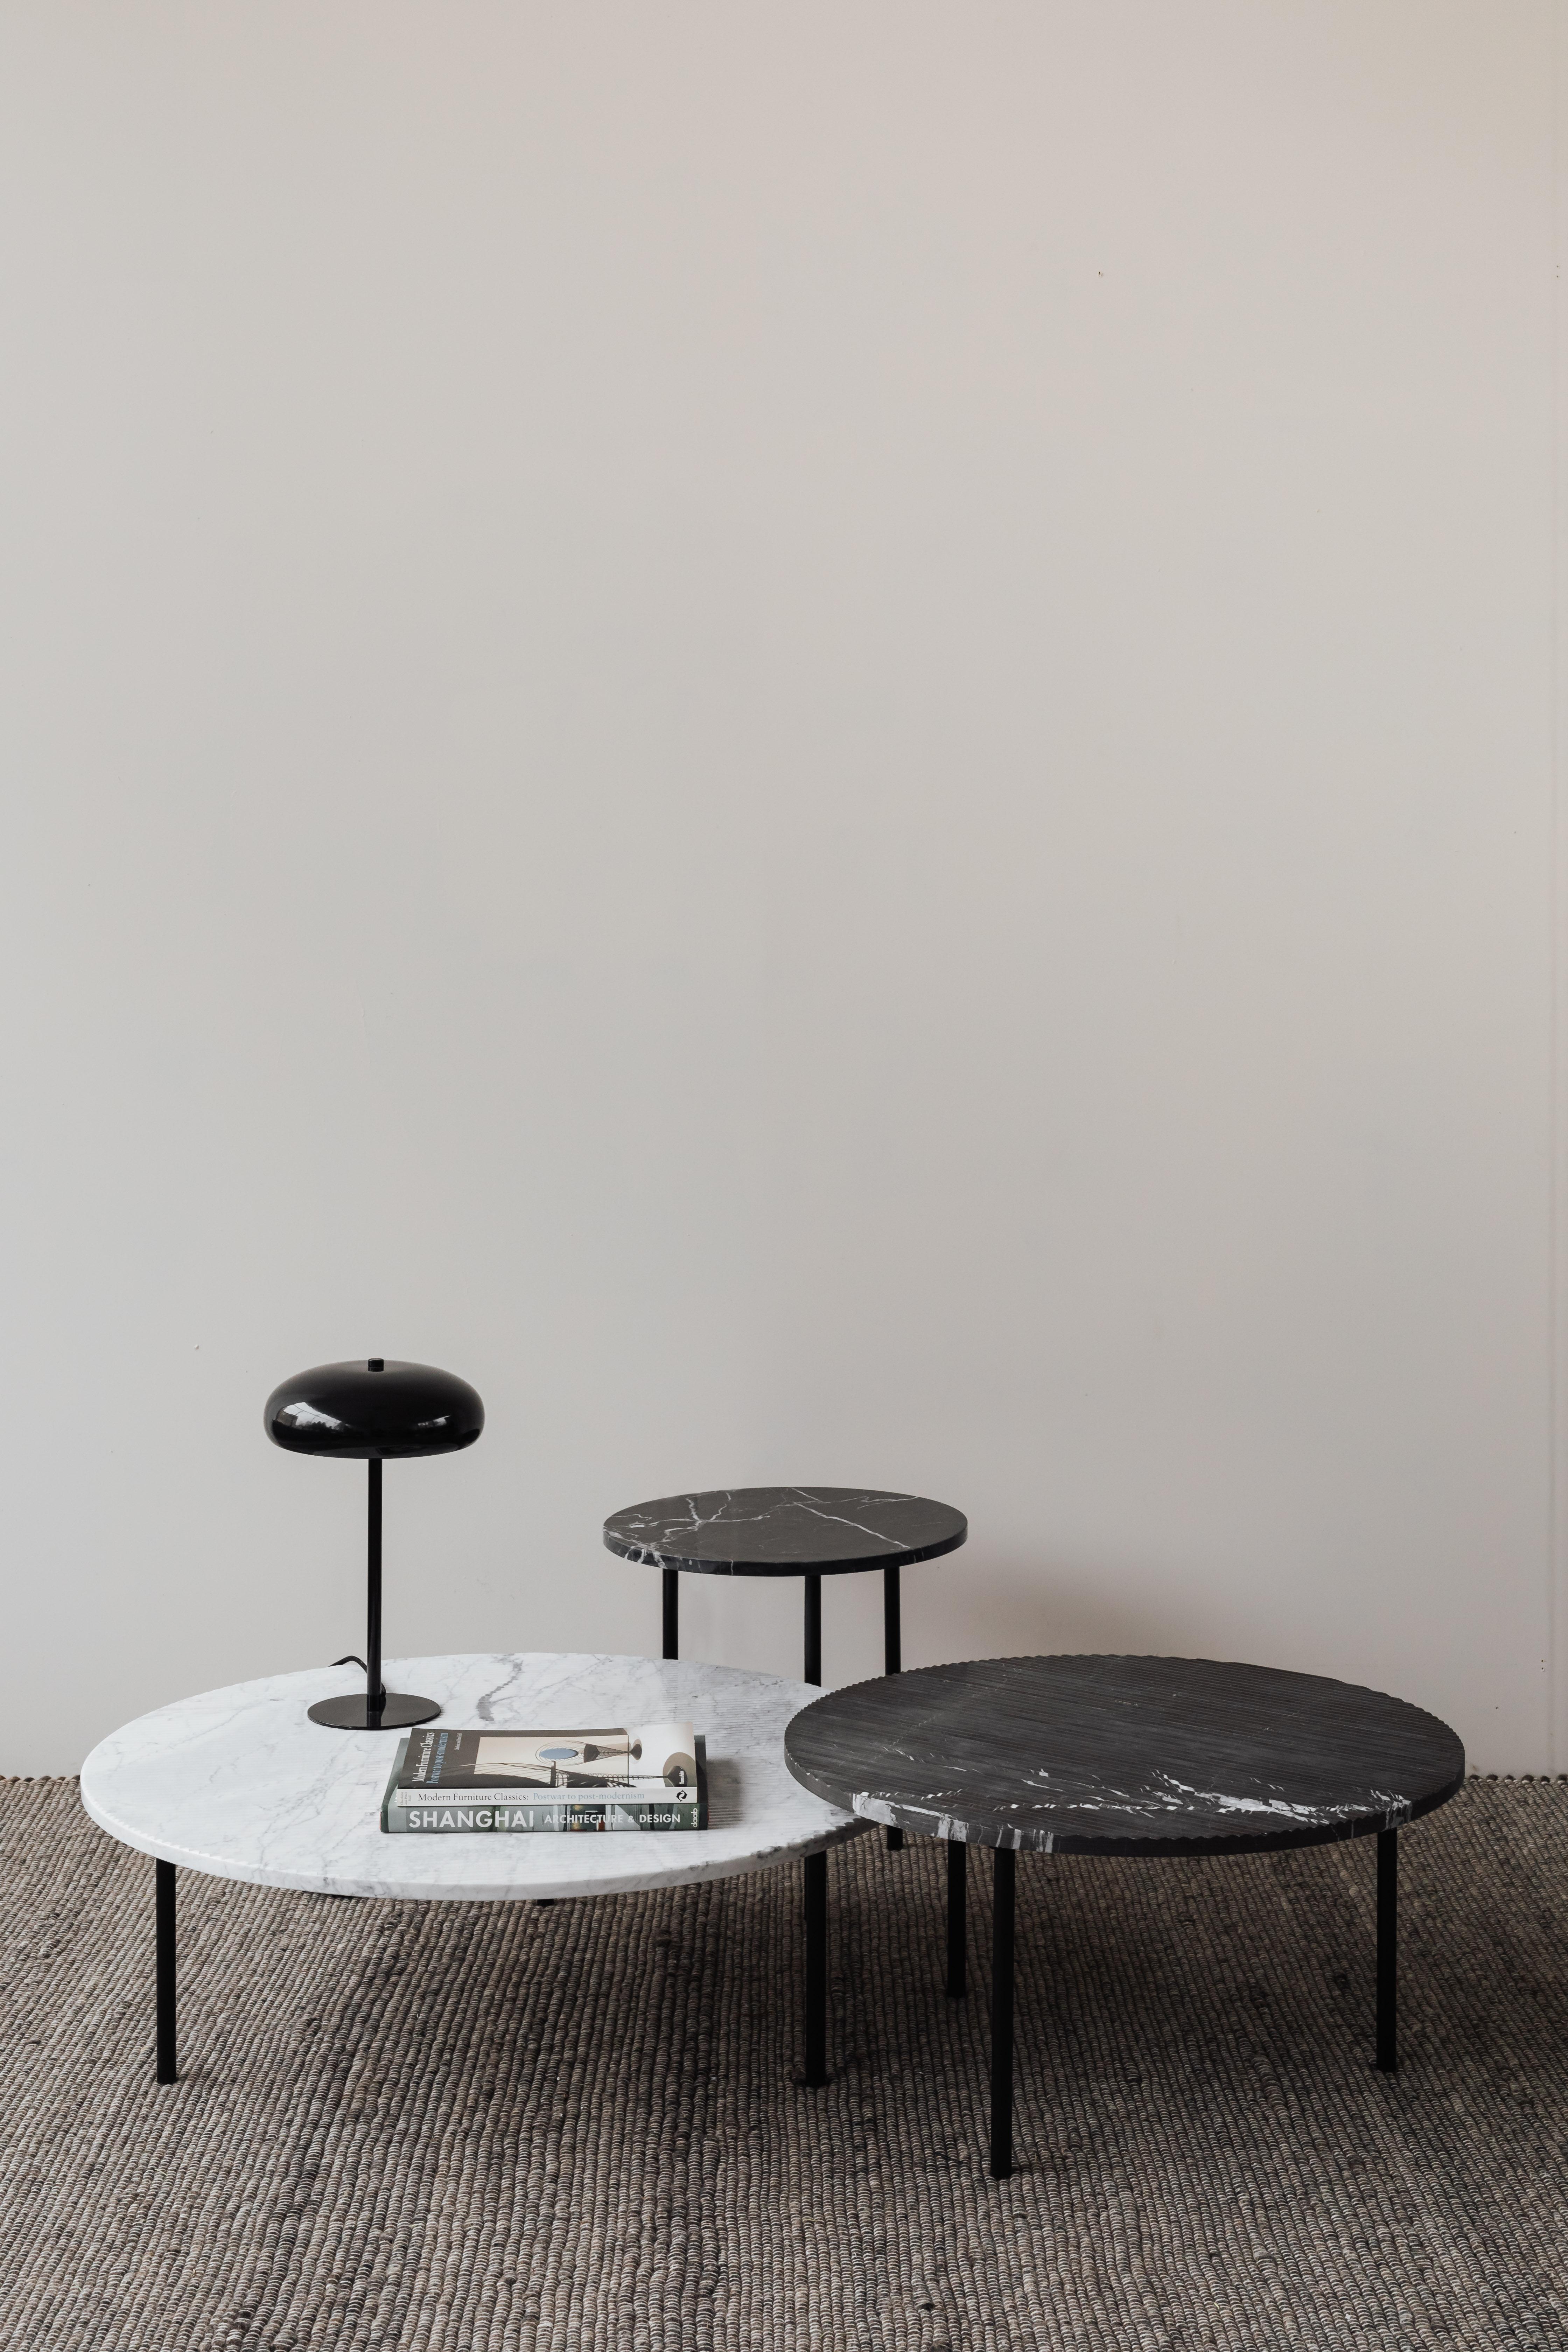 The GRUFF S coffee table is the smallest of the GRUFF tables. It can be used as an individual piece of furniture or, better yet, combined with GRUFF M or L tables. The tables of this line are offered with four, well-matched finishes: 
• Carrara